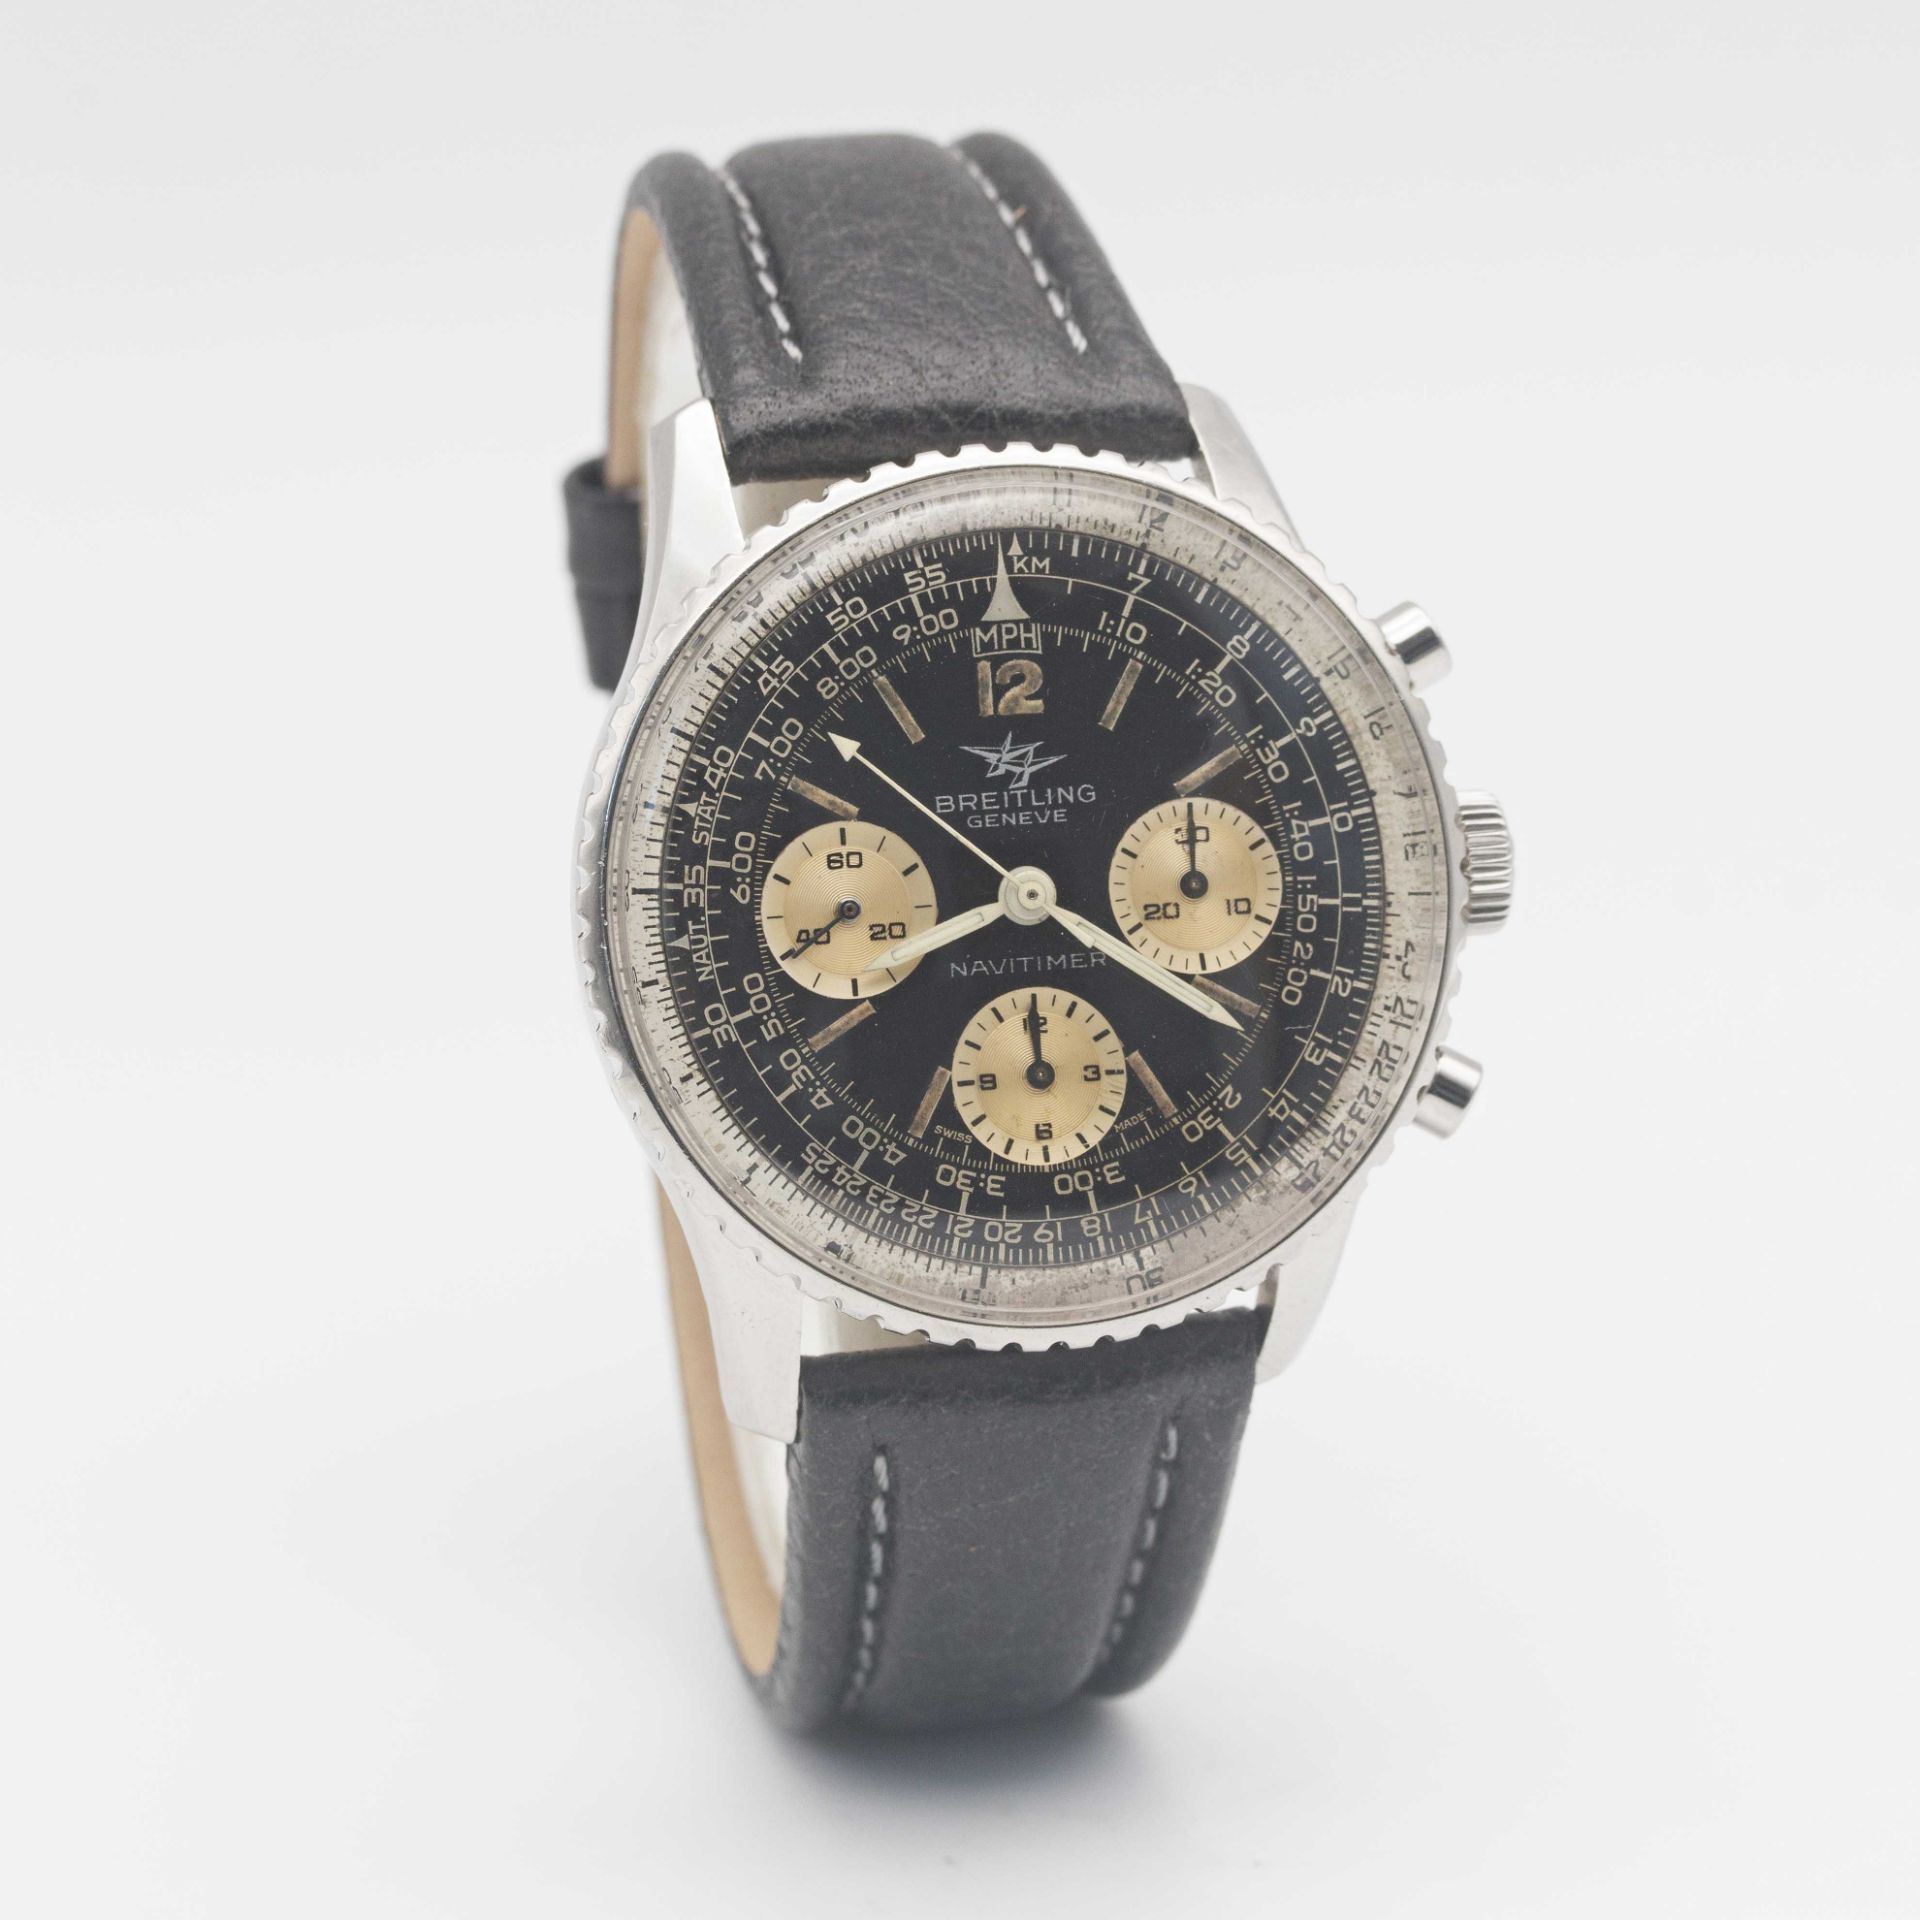 A GENTLEMAN'S STAINLESS STEEL BREITLING NAVITIMER CHRONOGRAPH WRIST WATCH CIRCA 1966, REF. 806 - Image 5 of 9